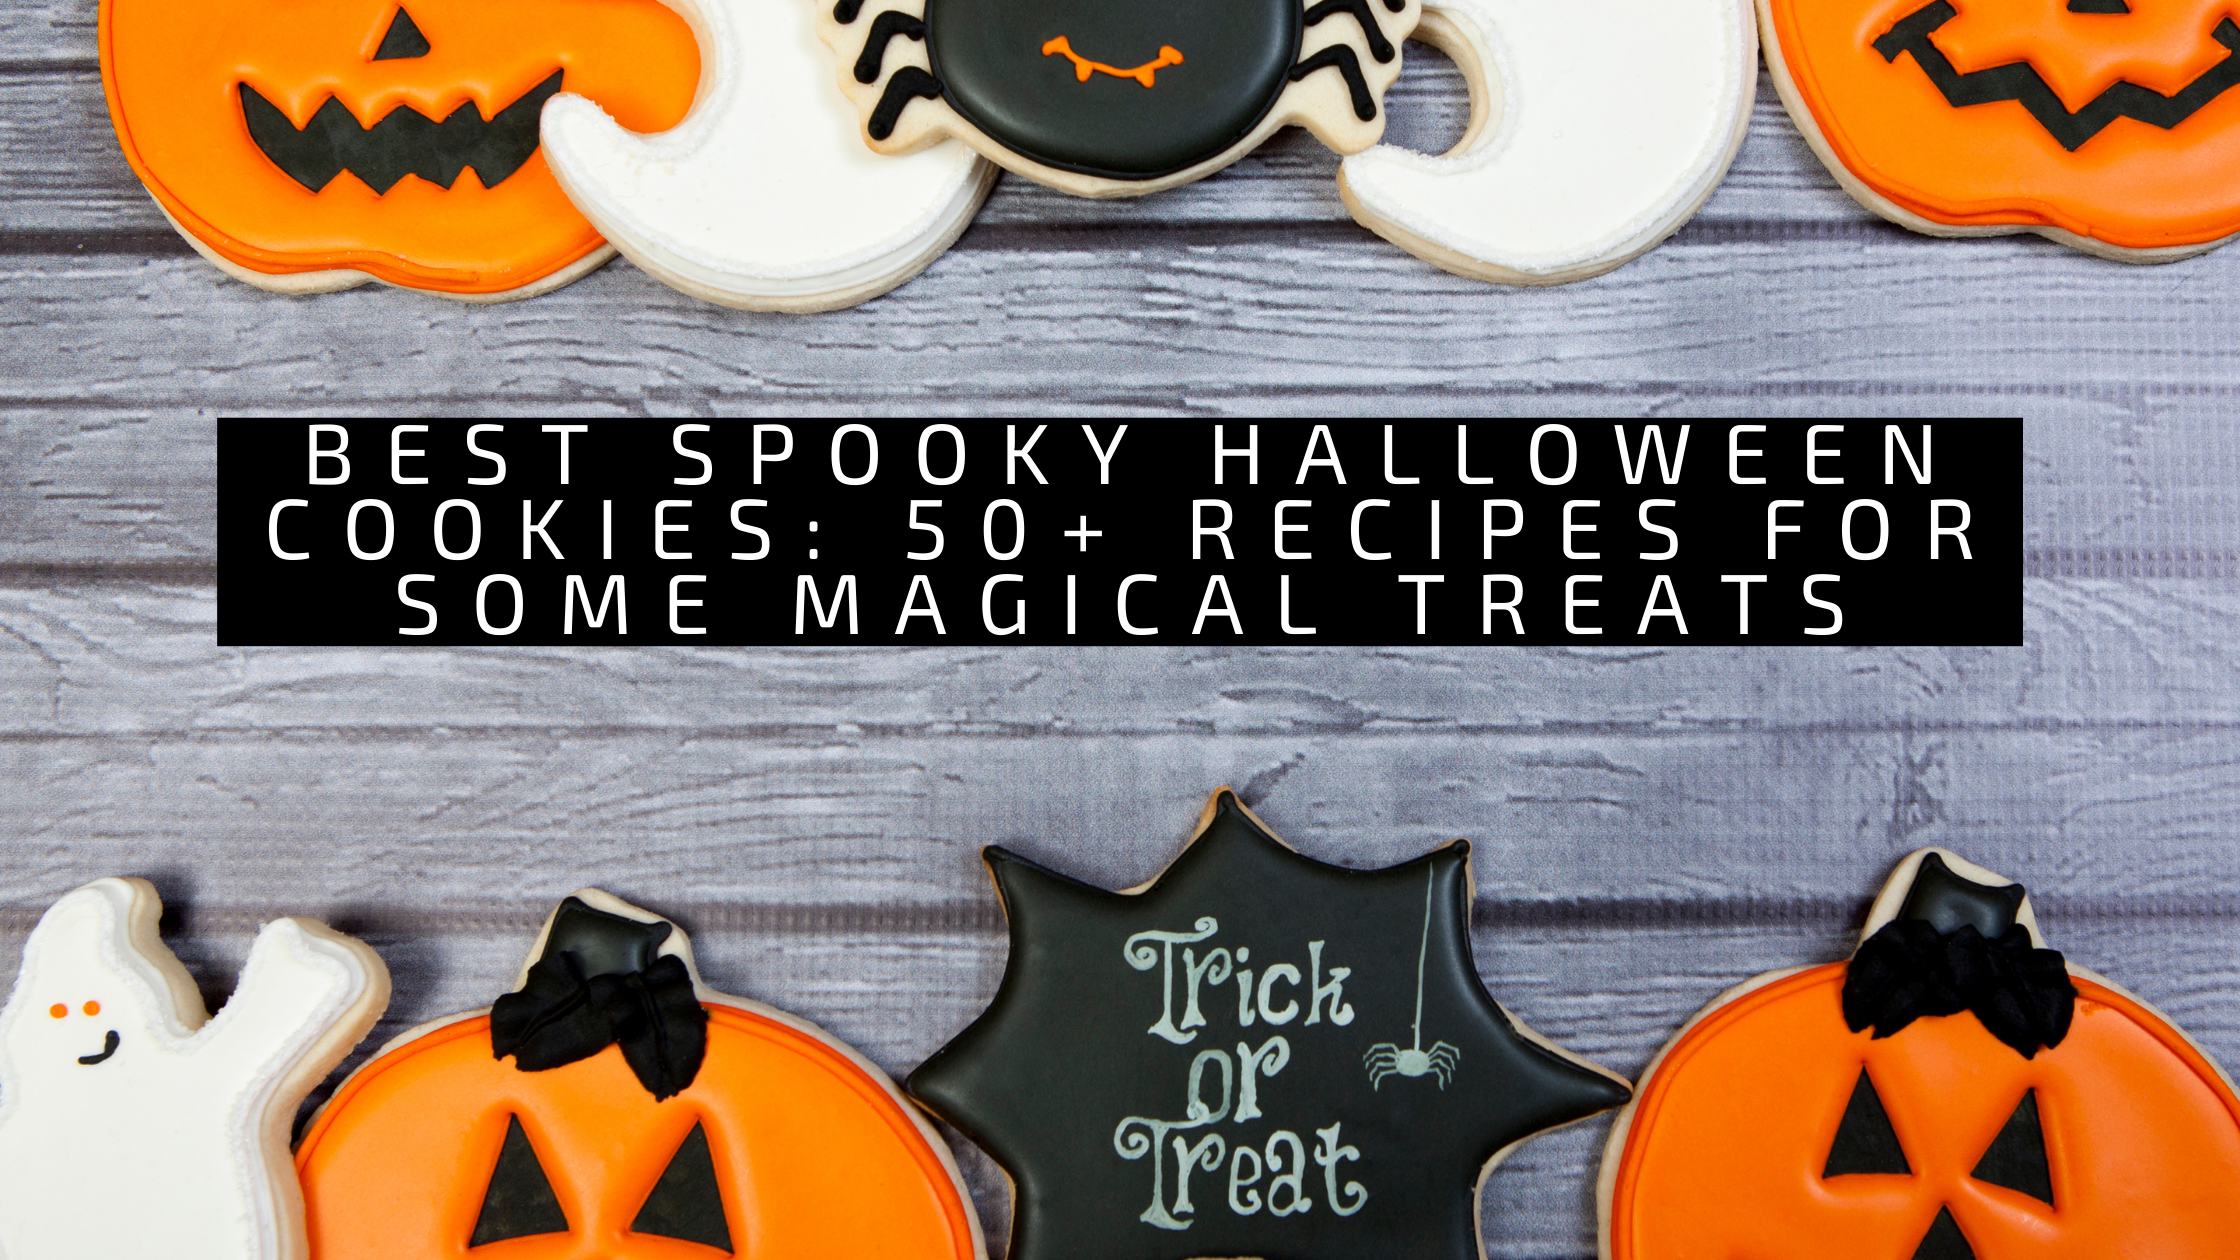 Best Spooky Halloween Cookies: 50+ Recipes for Some Magical Treats 3